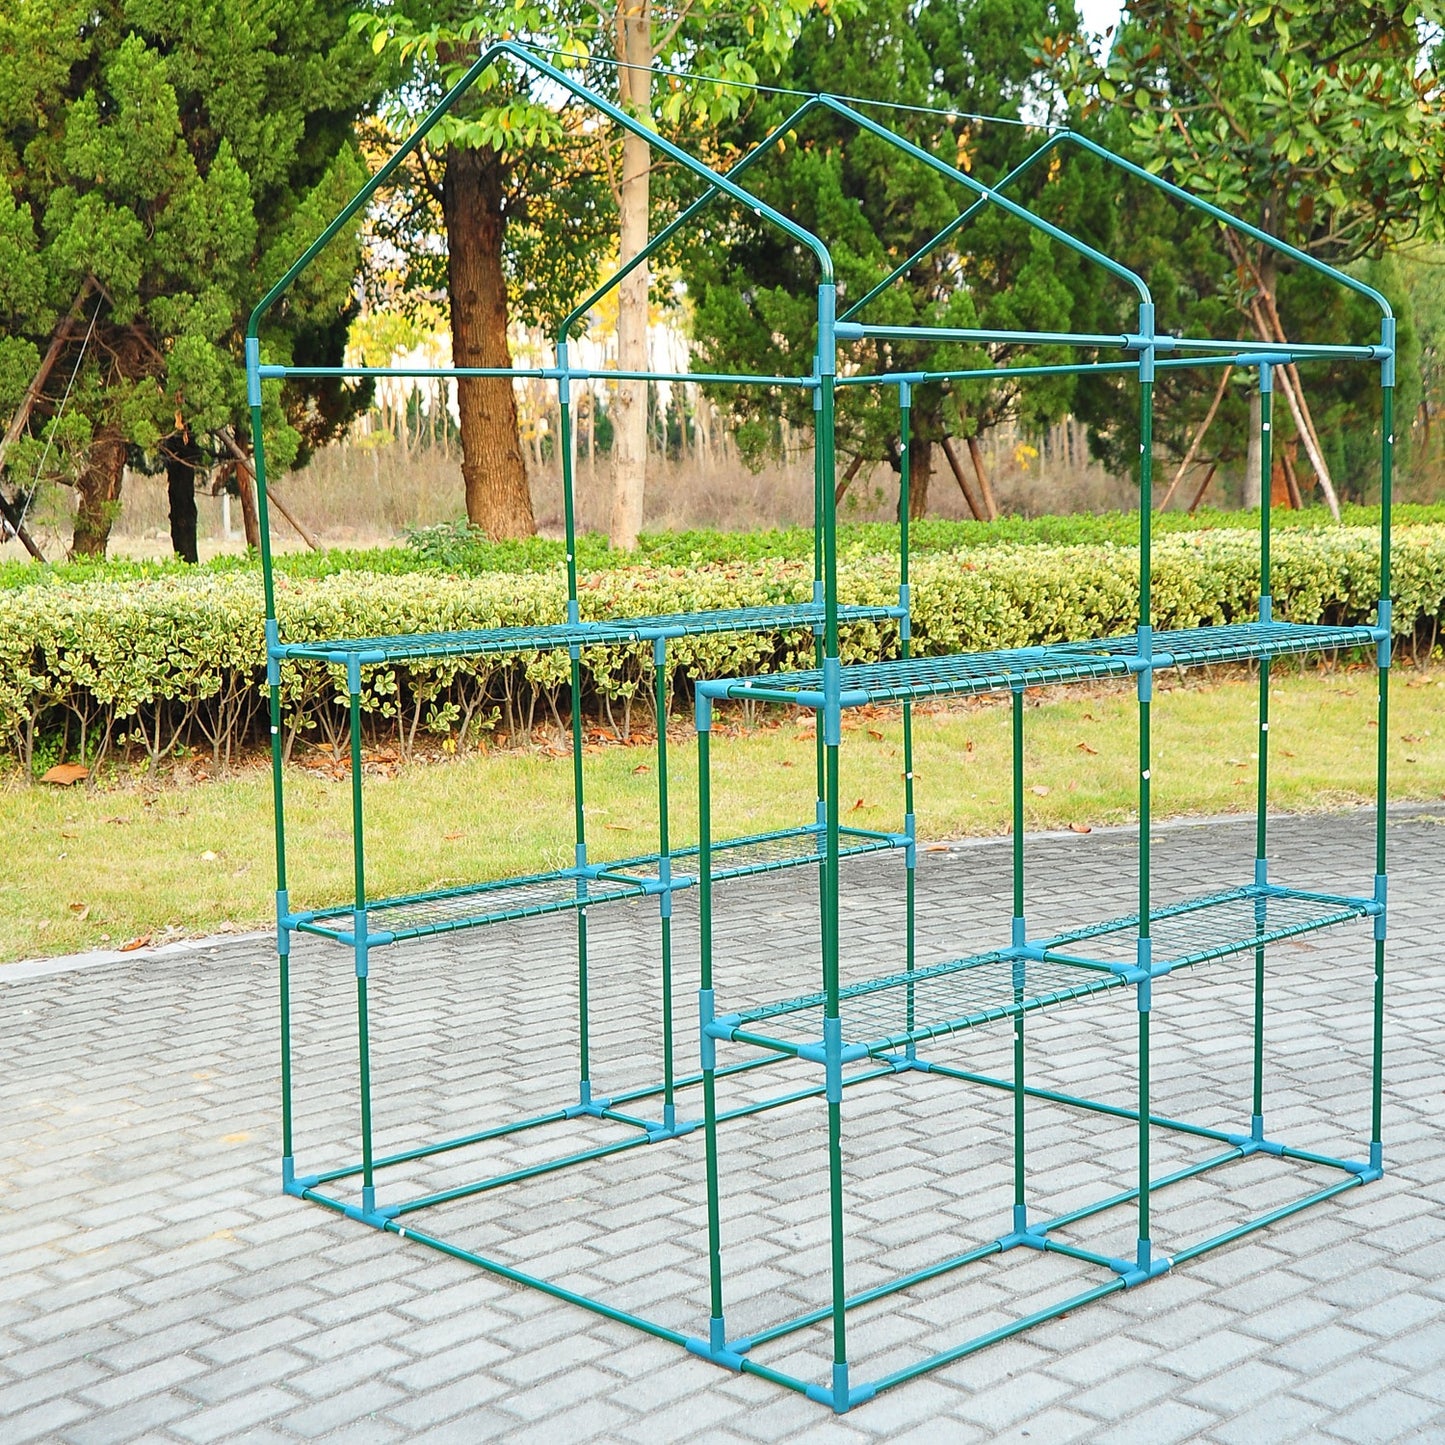 Outsunny 1.43Lx1.43Wx1.95H m Steel Frame Greenhouse, 2 Shelves-Deep Green